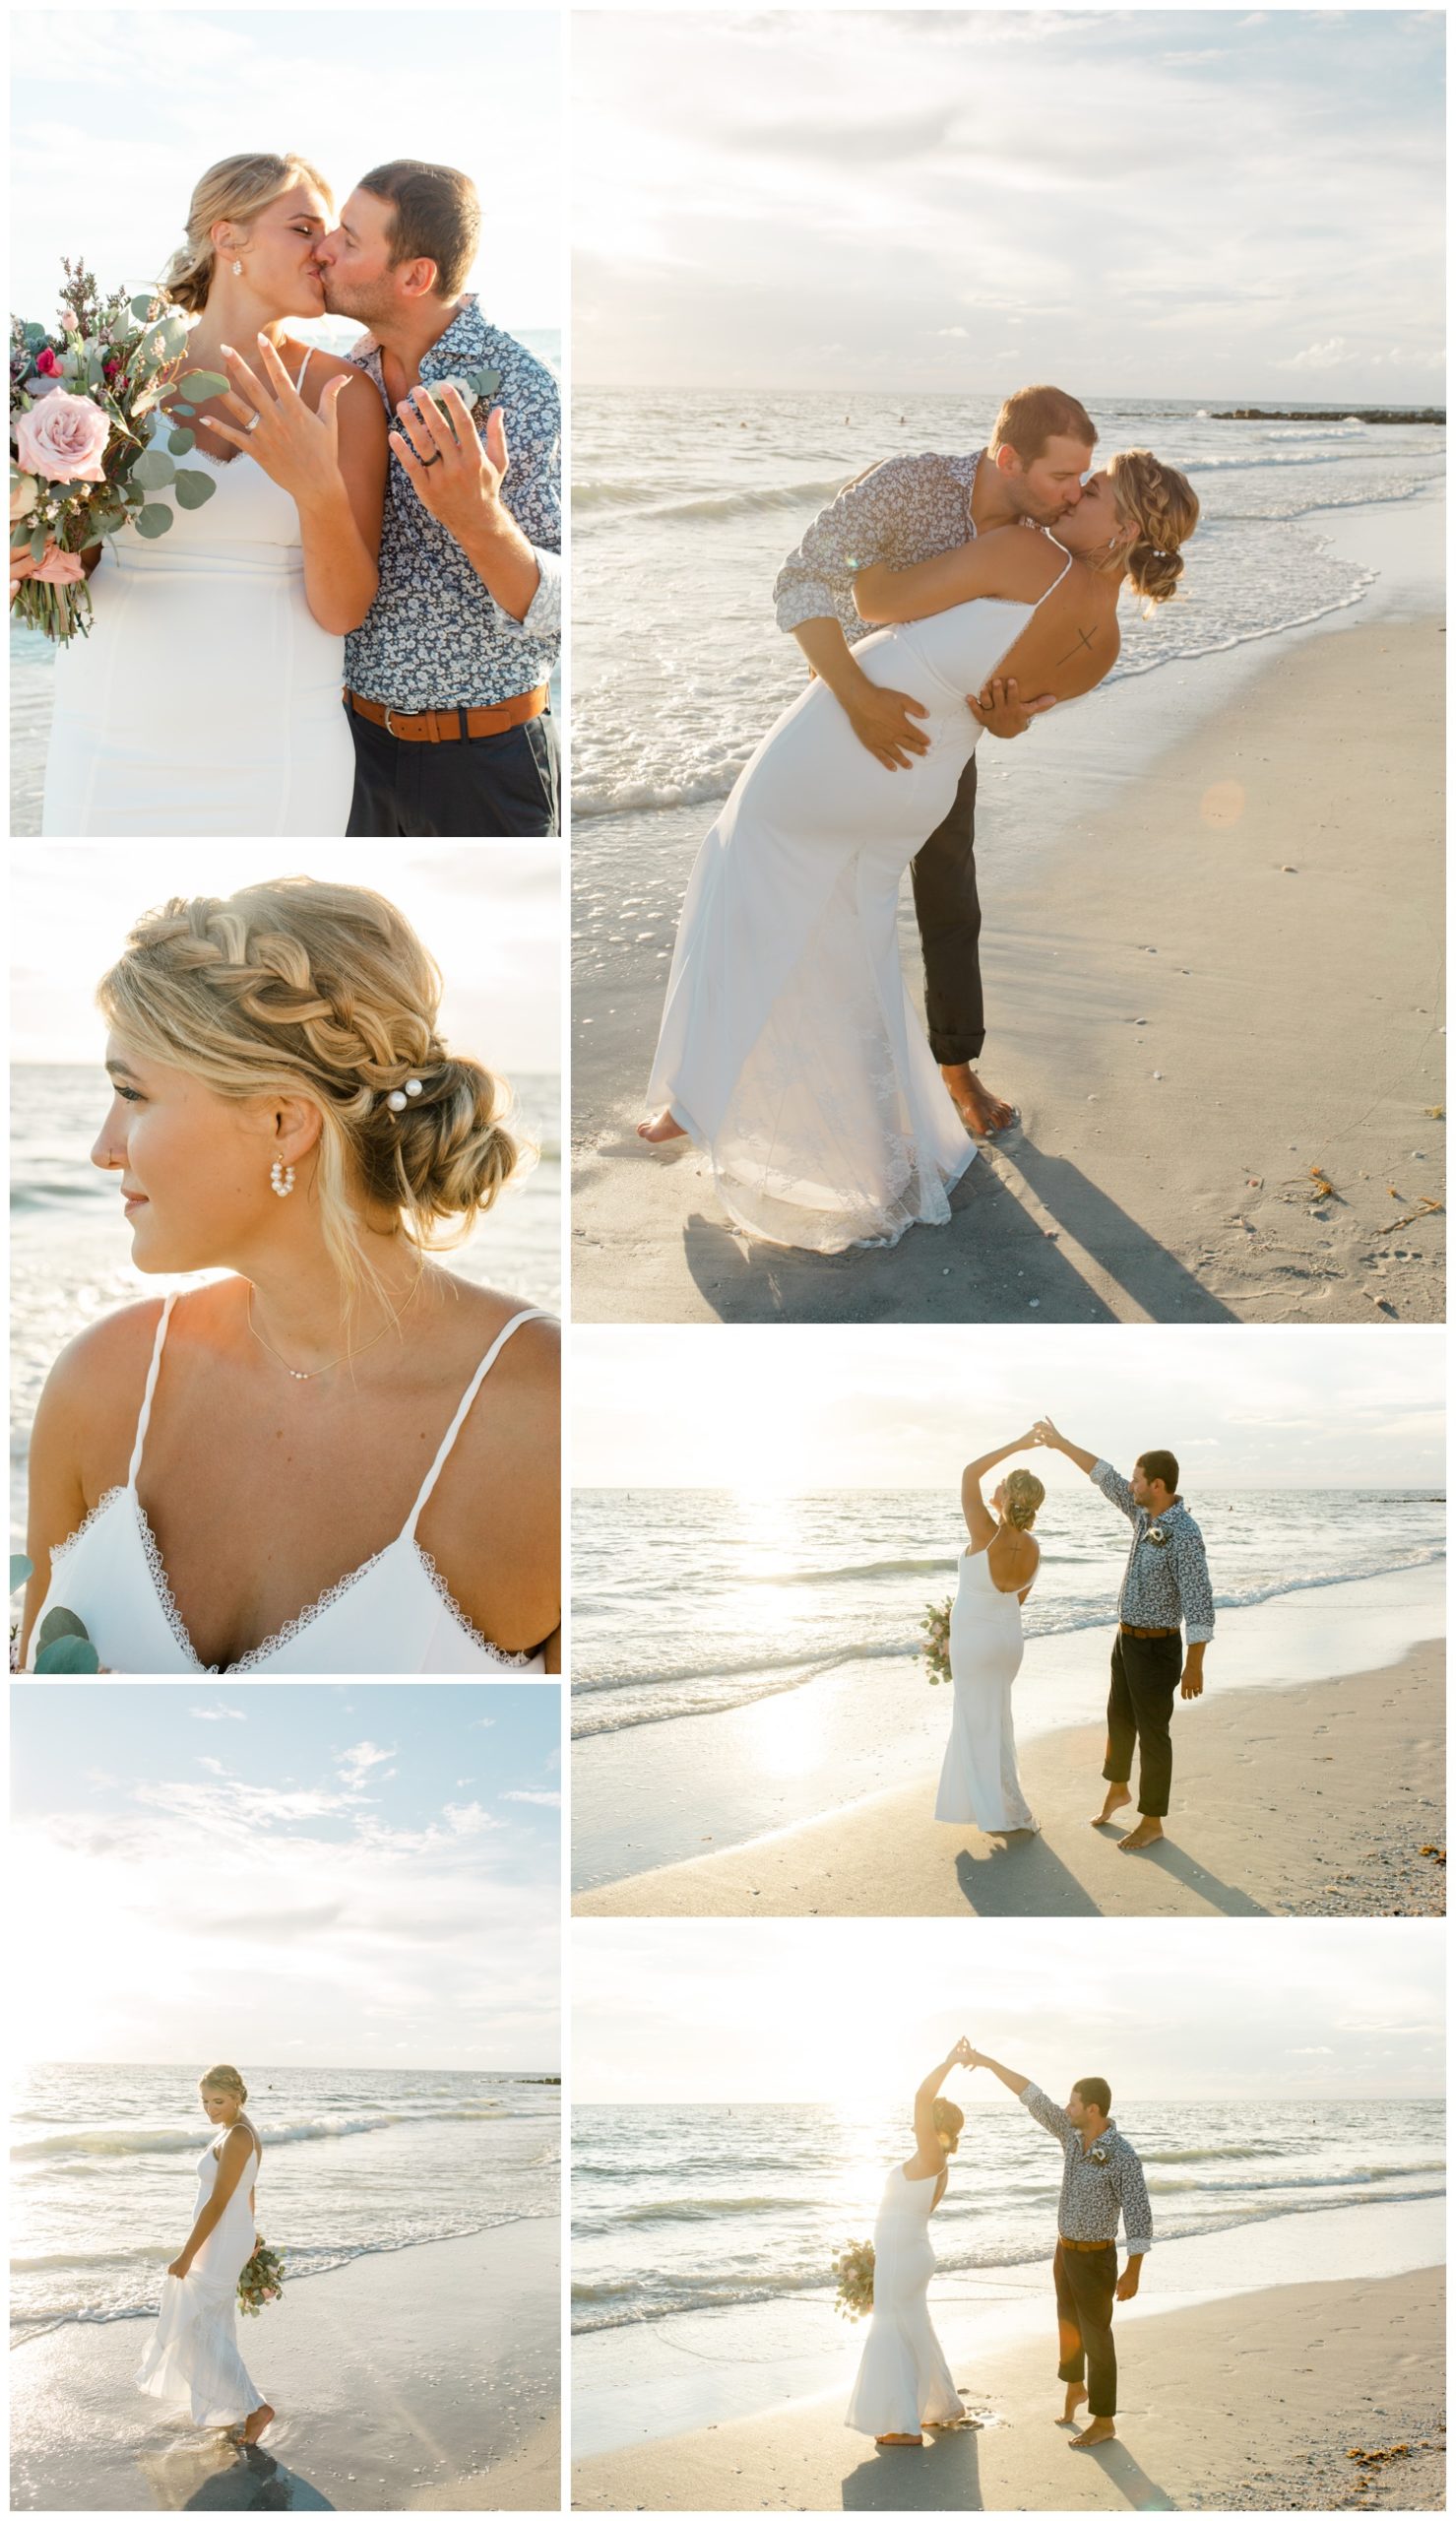 Elopement at Sunset Beach - couples portraits - elizabeth baxter photography, lasting luxe